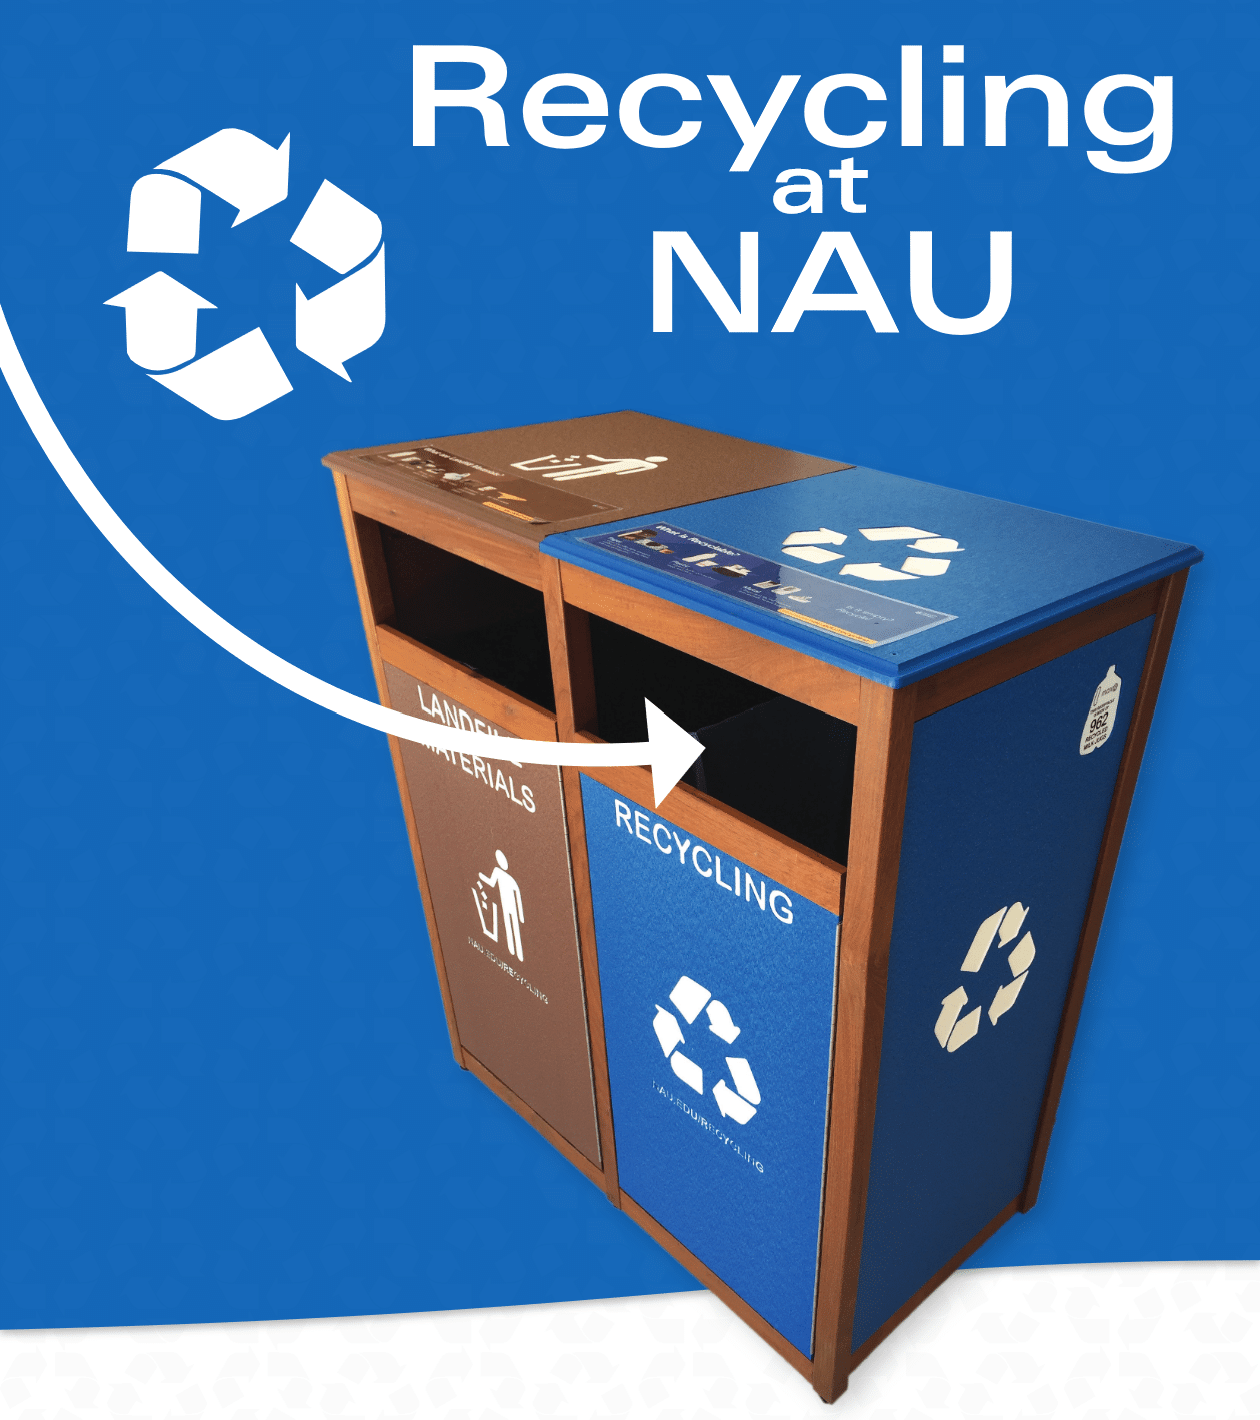 recycling at nau written at the top. Recycle sign in the top left corner. A recycle and landfill bin next to each other. Blue background.